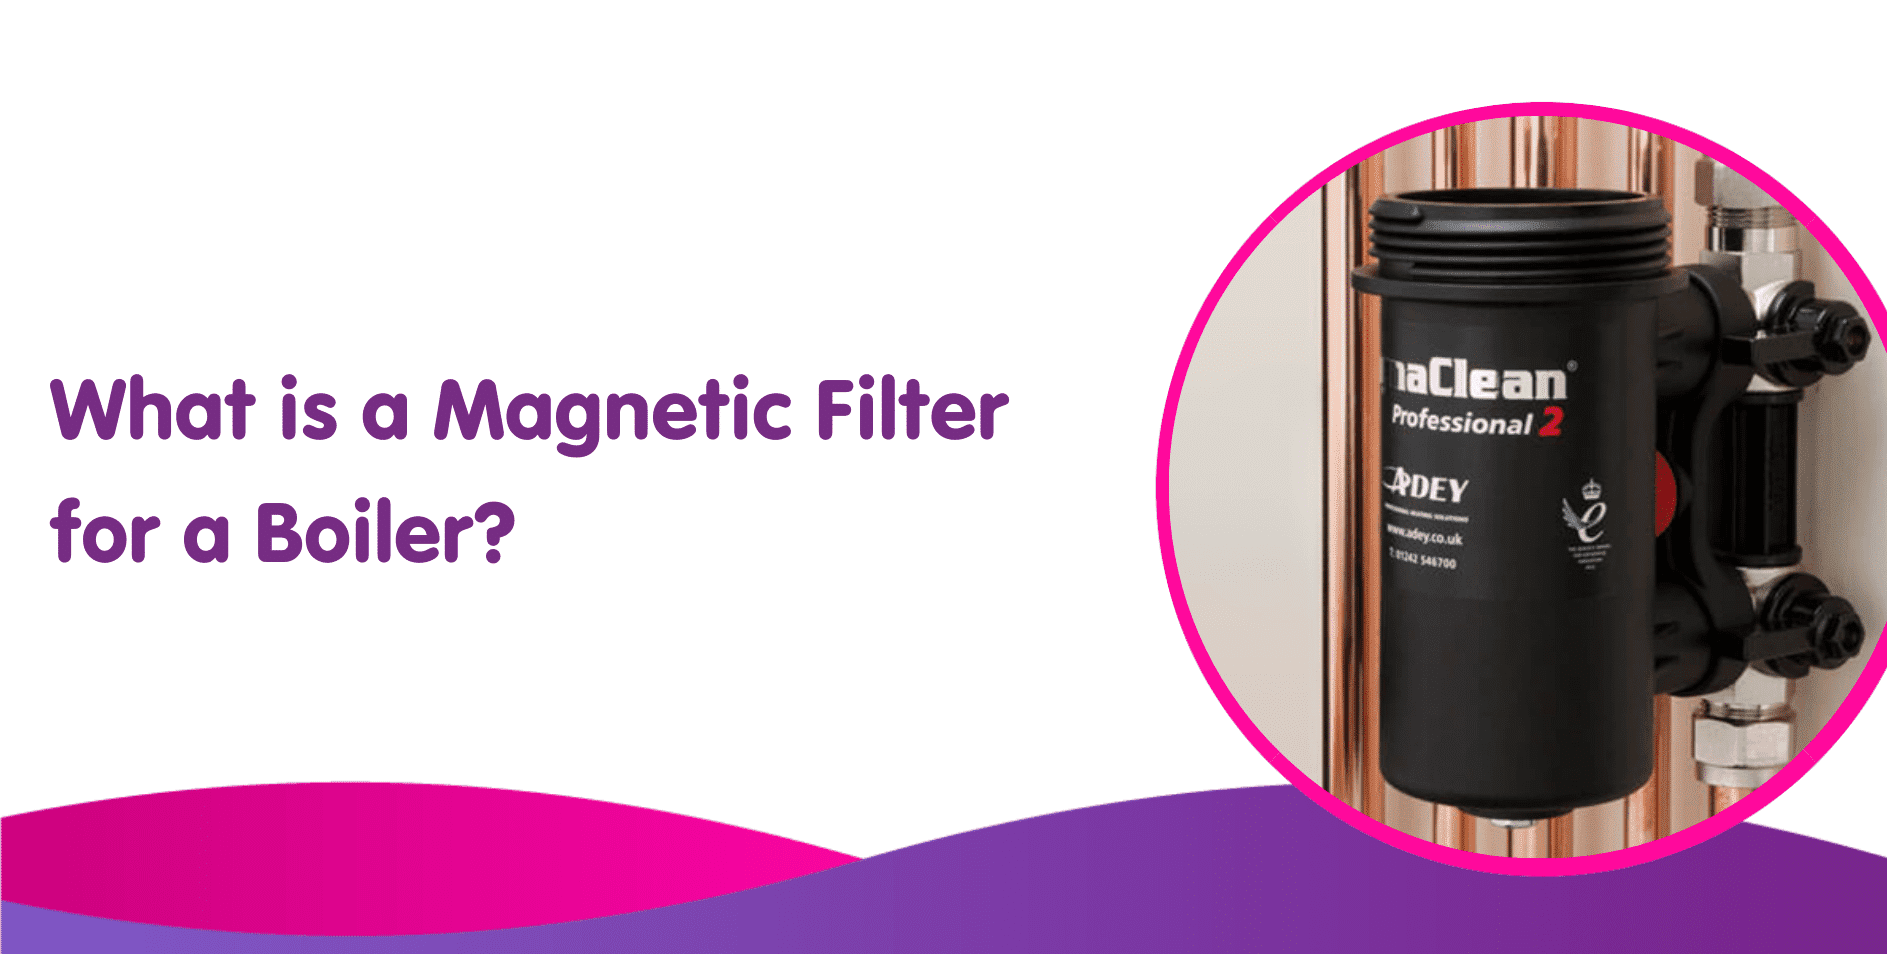 What is a Magnetic Filter for a Boiler